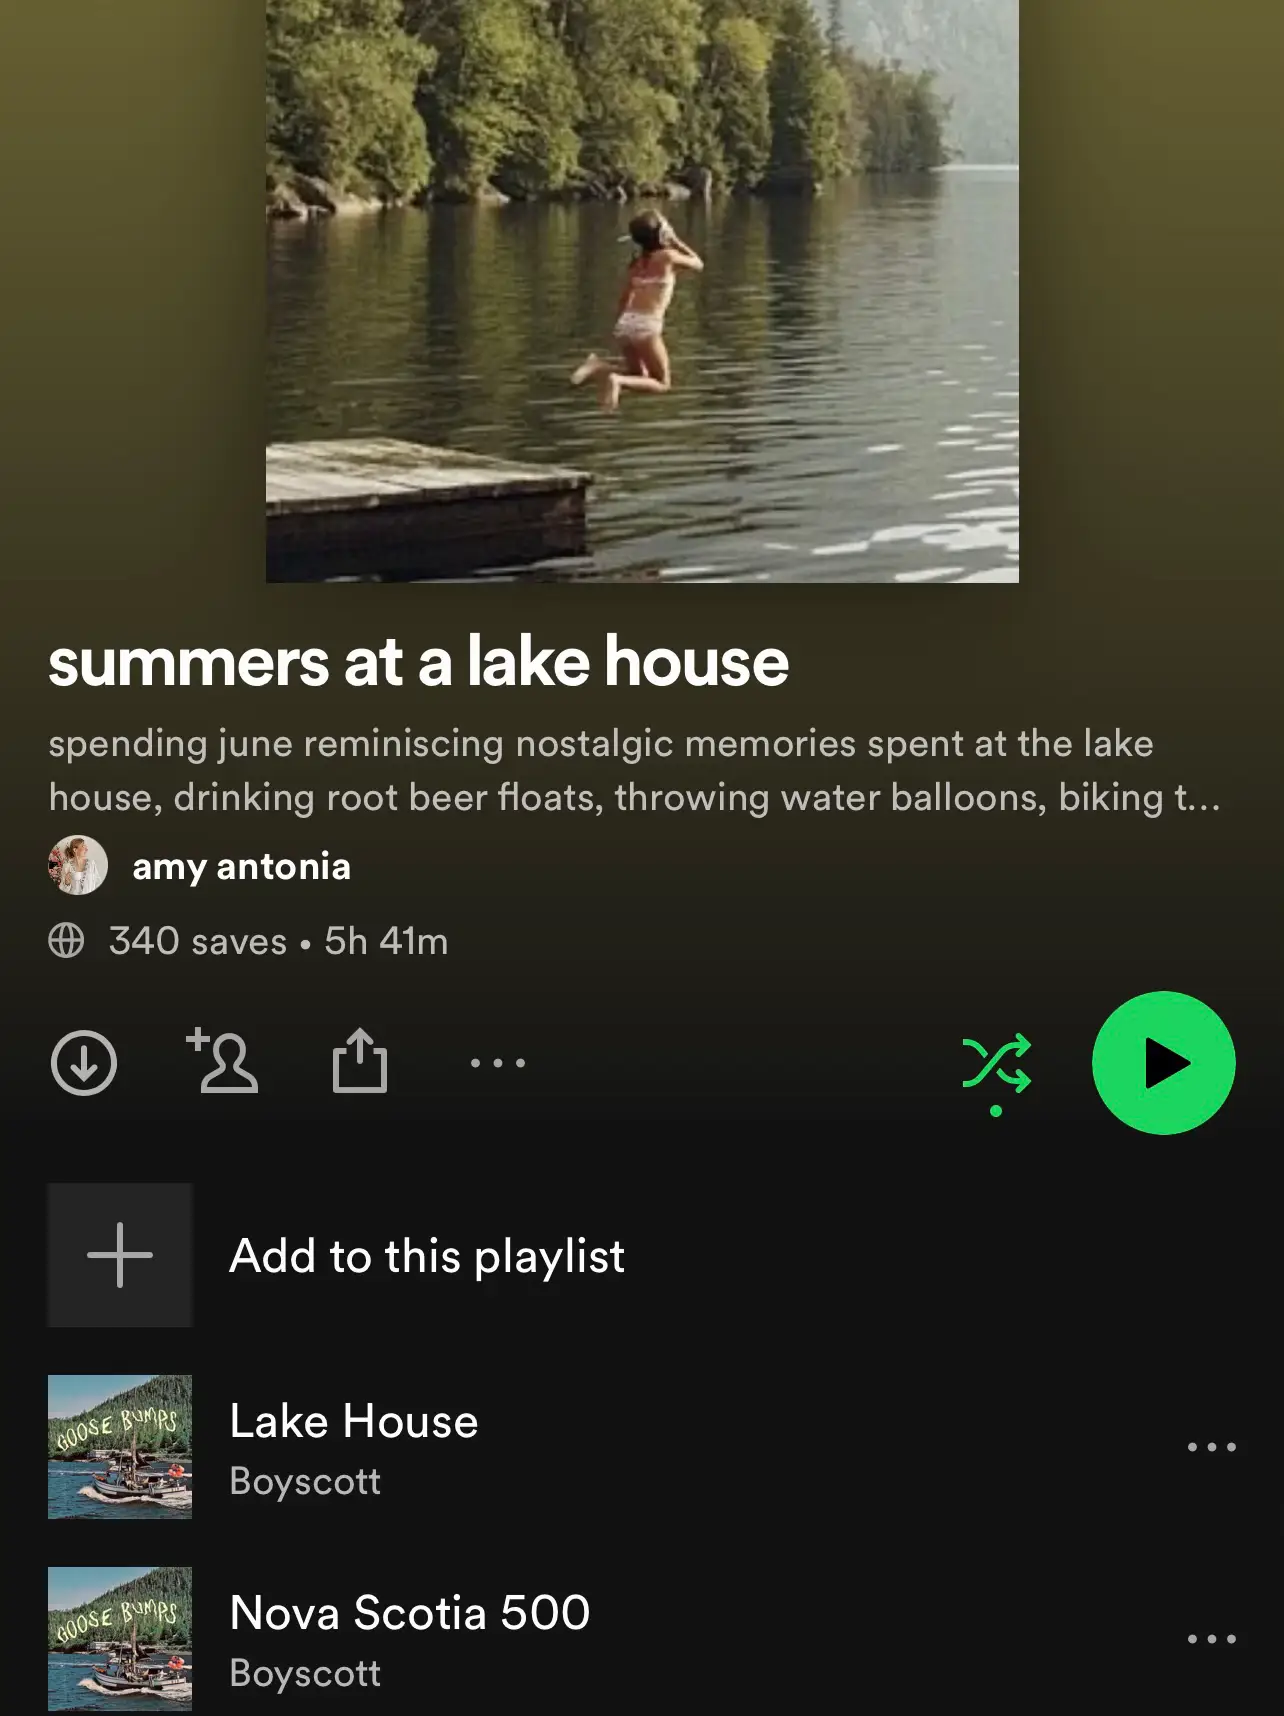  A playlist of music from a lake house in Nova Scotia.